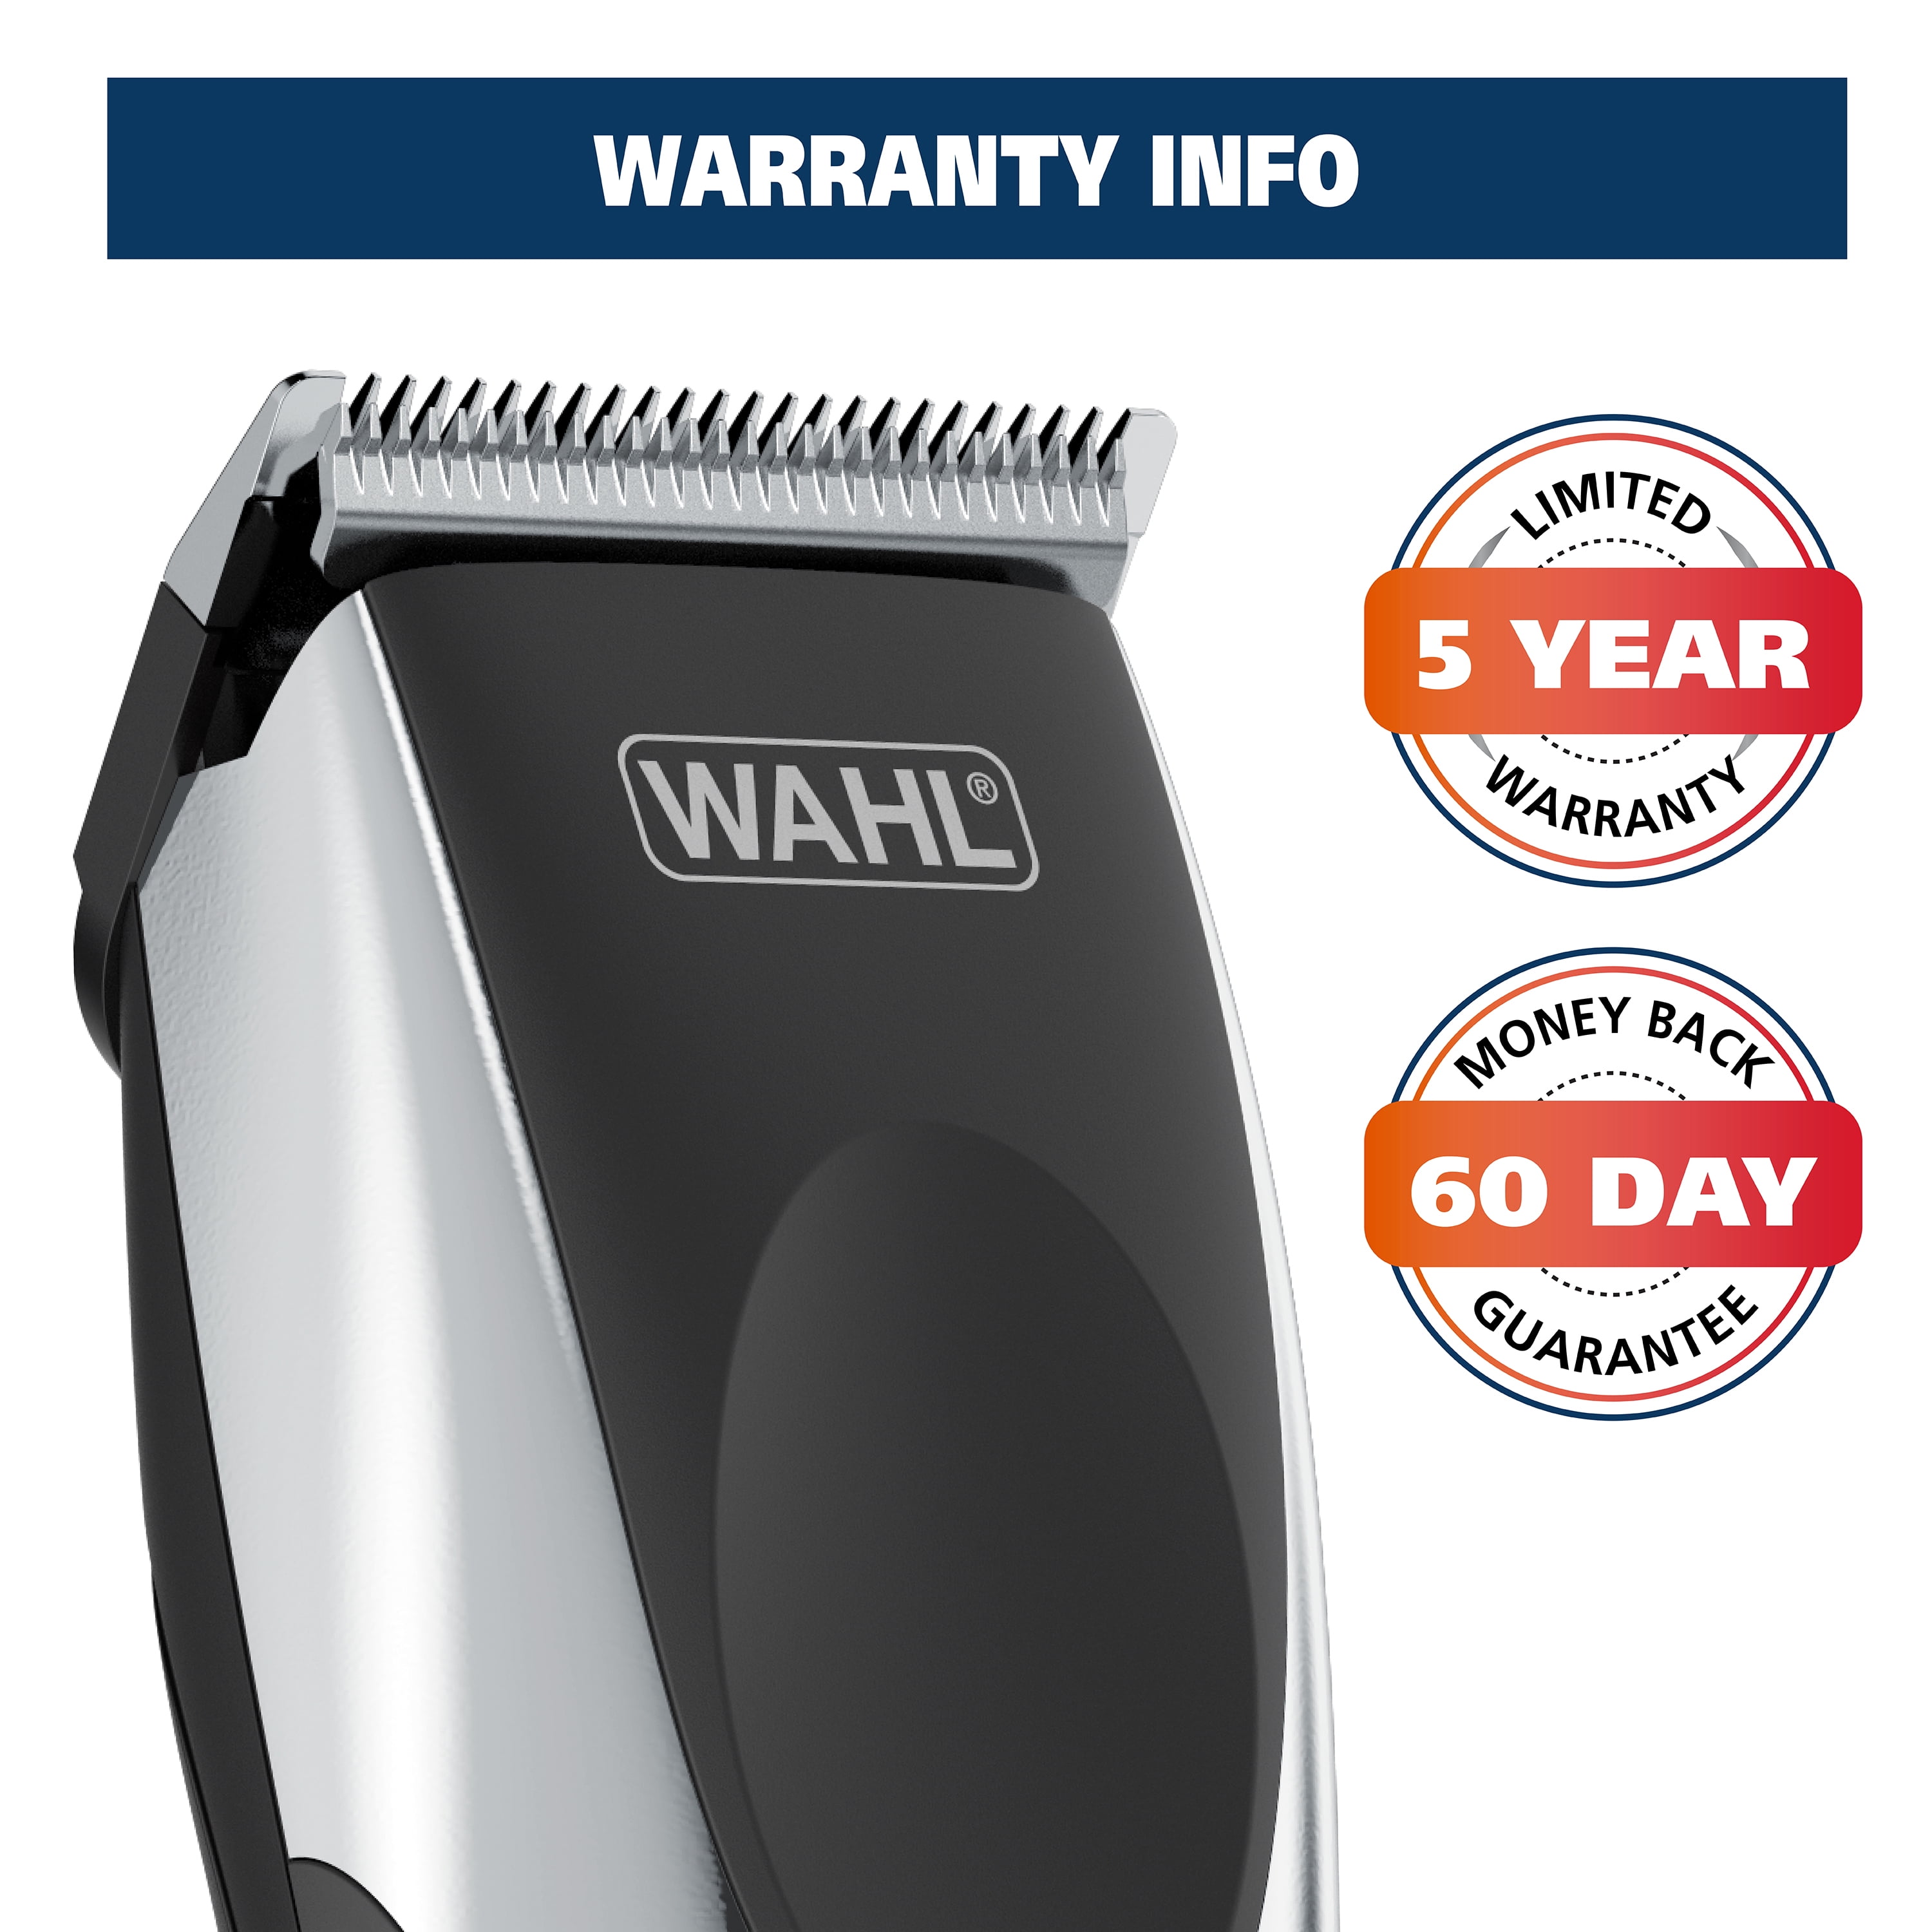 / - Transformer - 9639-700 Voltage Beard & Cordless Model Cord with Haircut Worldwide Wahl Clipper